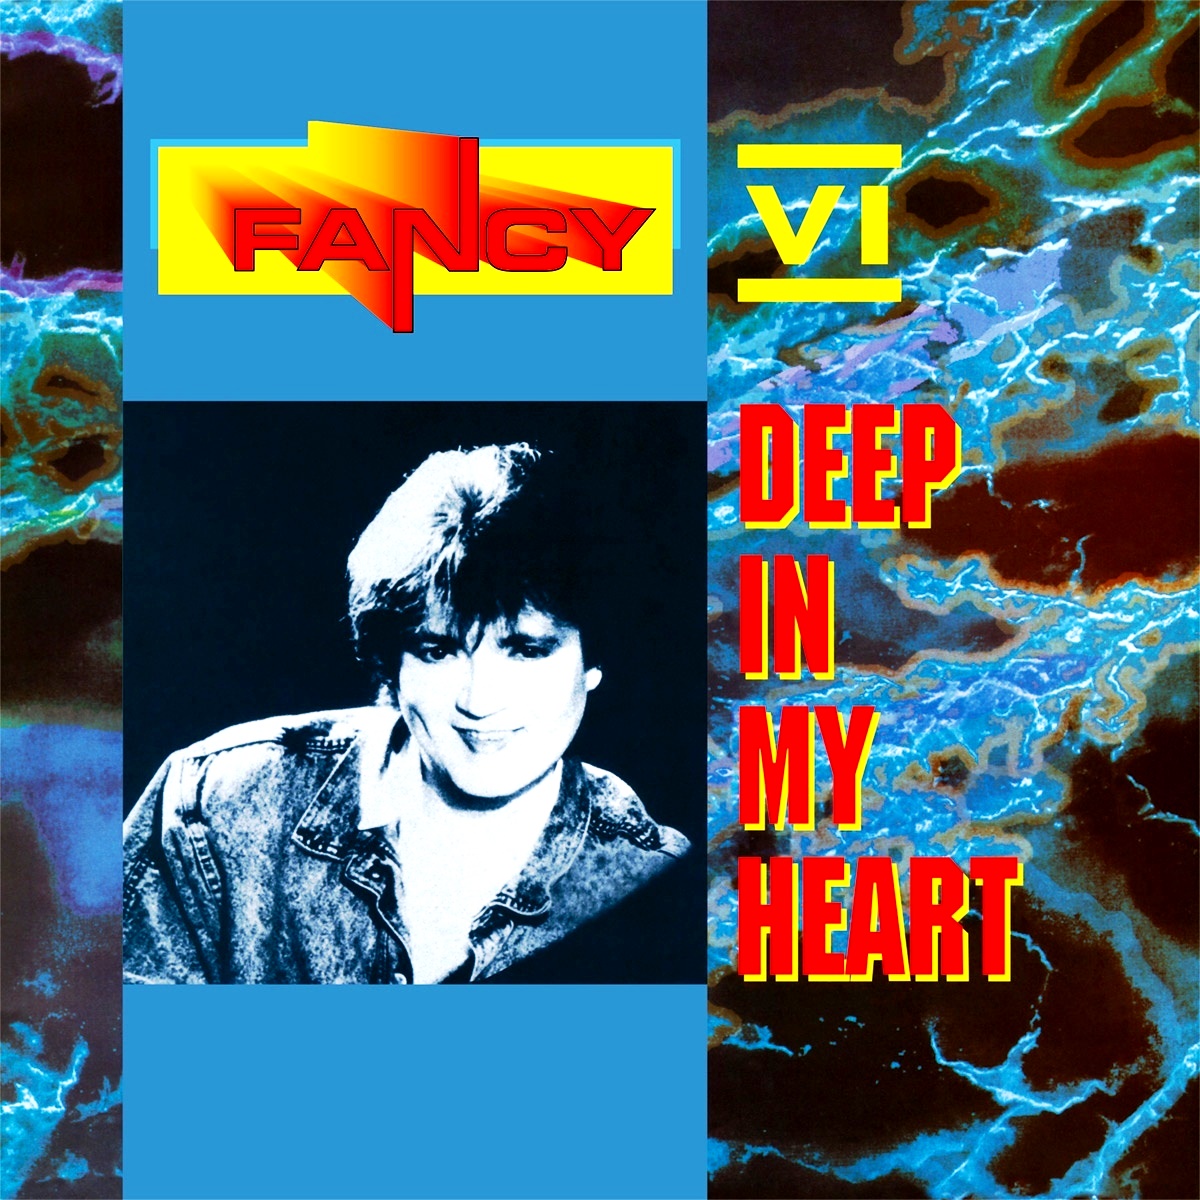 Поп Maschina Records Fancy - VI: Deep In My Heart (Limited Edition 180 Gram Black Vinyl LP) 1 5 3kw electric underground full hydraulic lifting water well drilling rig portable deep water bore drilling machines sale